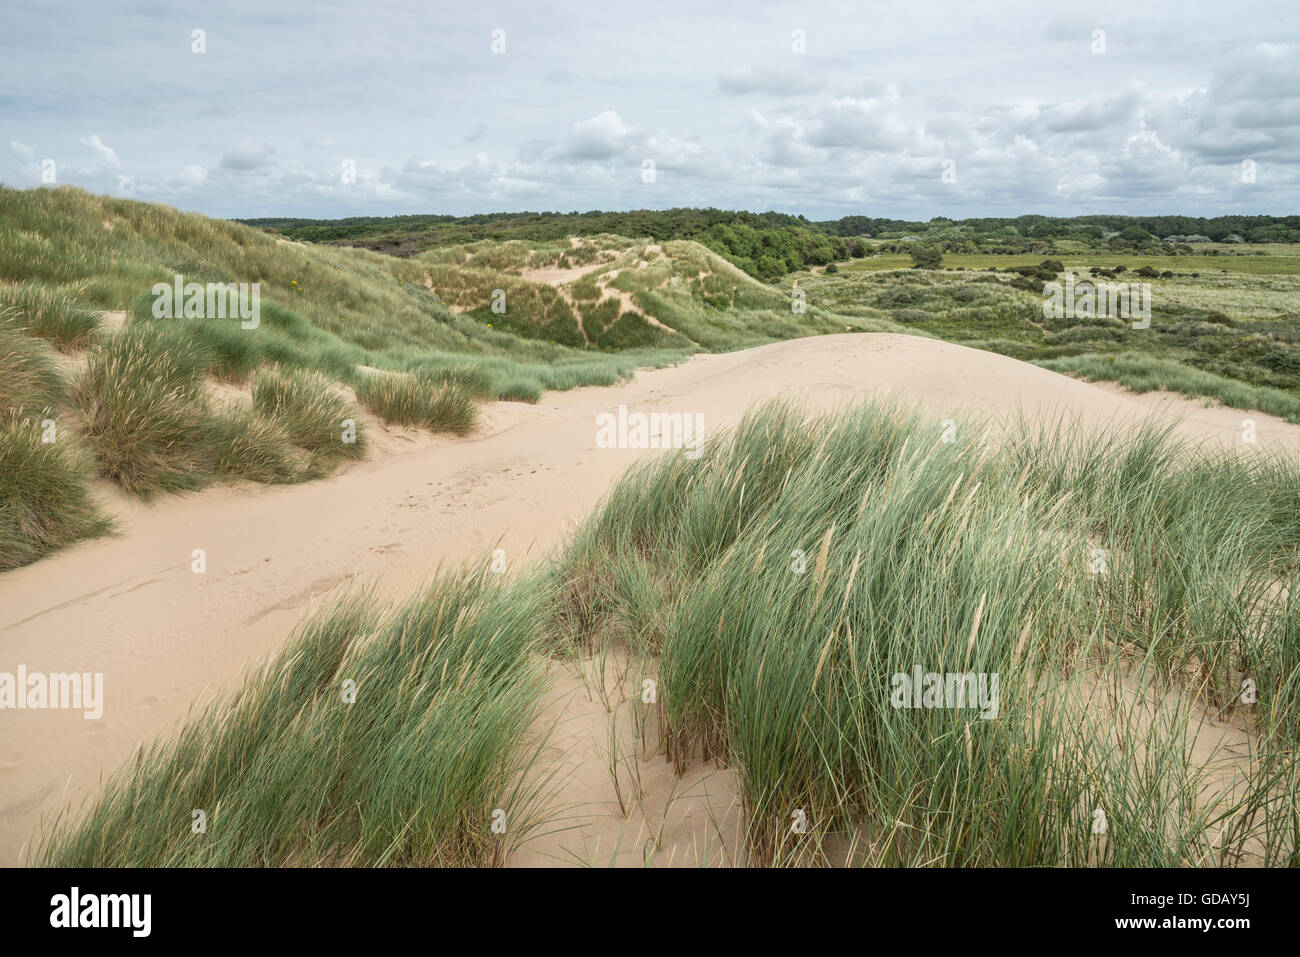 The expansive dunes at Formby point on the coast of Merseyside. Stock Photo